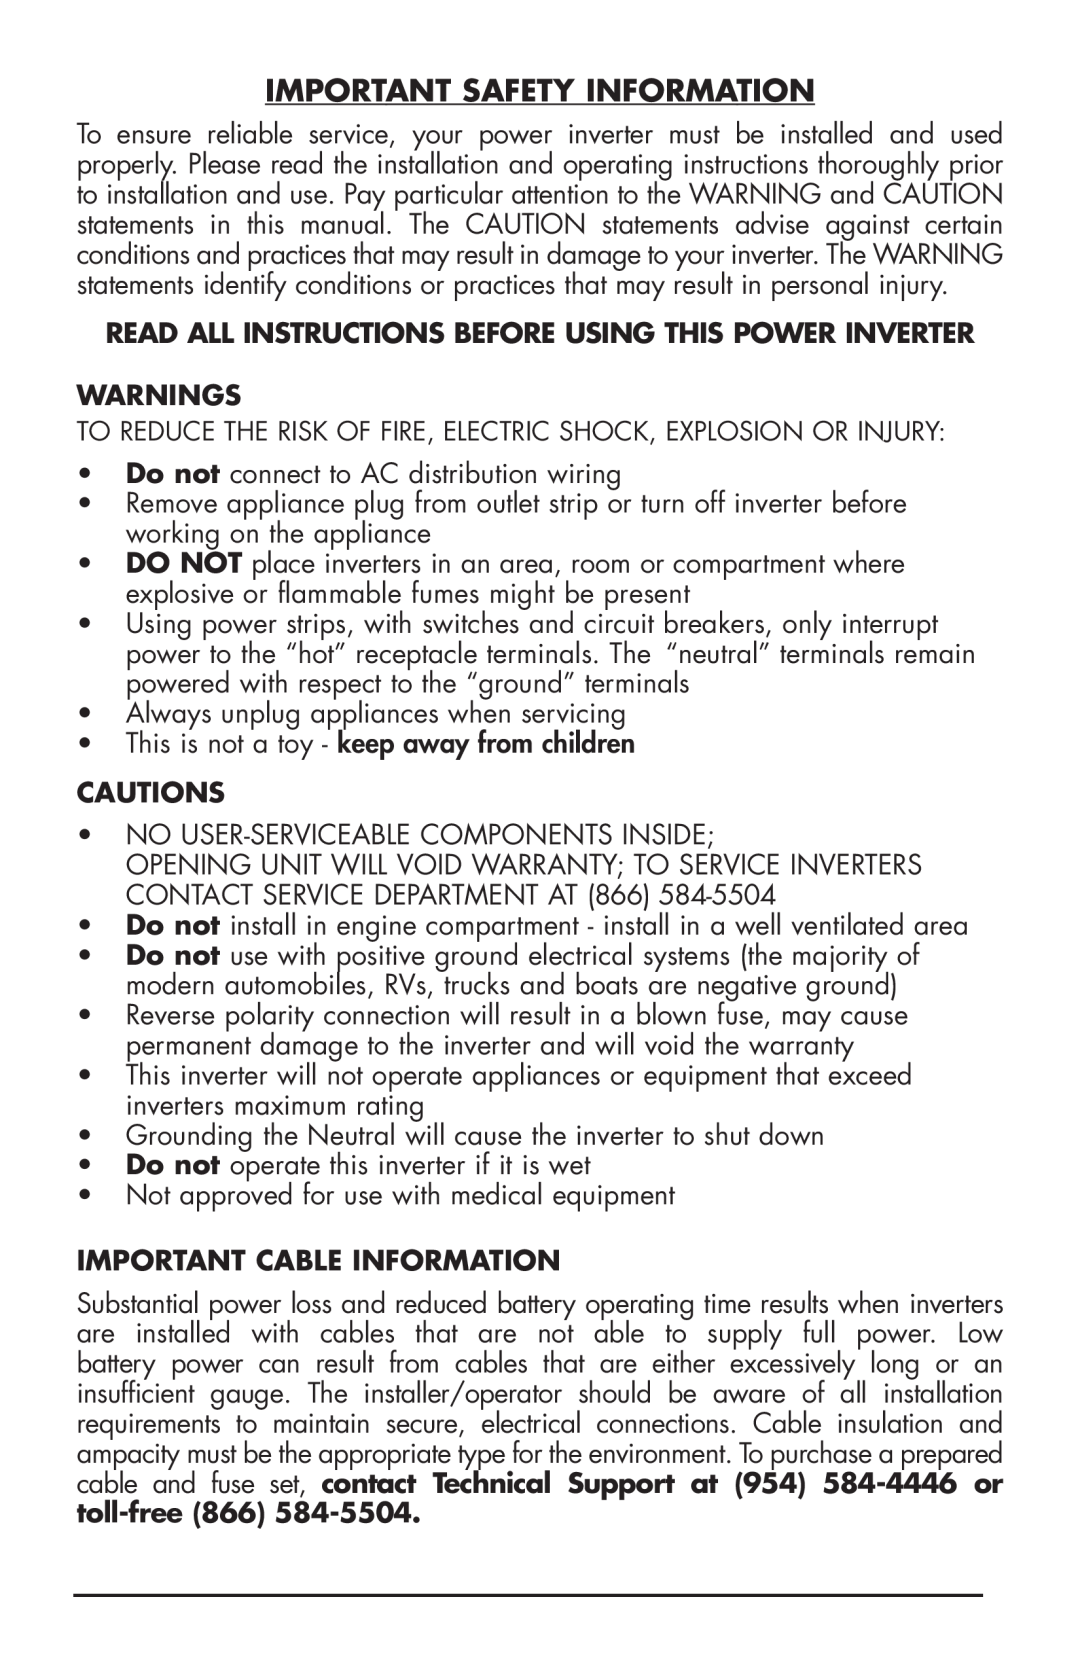 Vector VEC049C owner manual Important Safety Information, Warnings, Cautions, Important Cable Information 